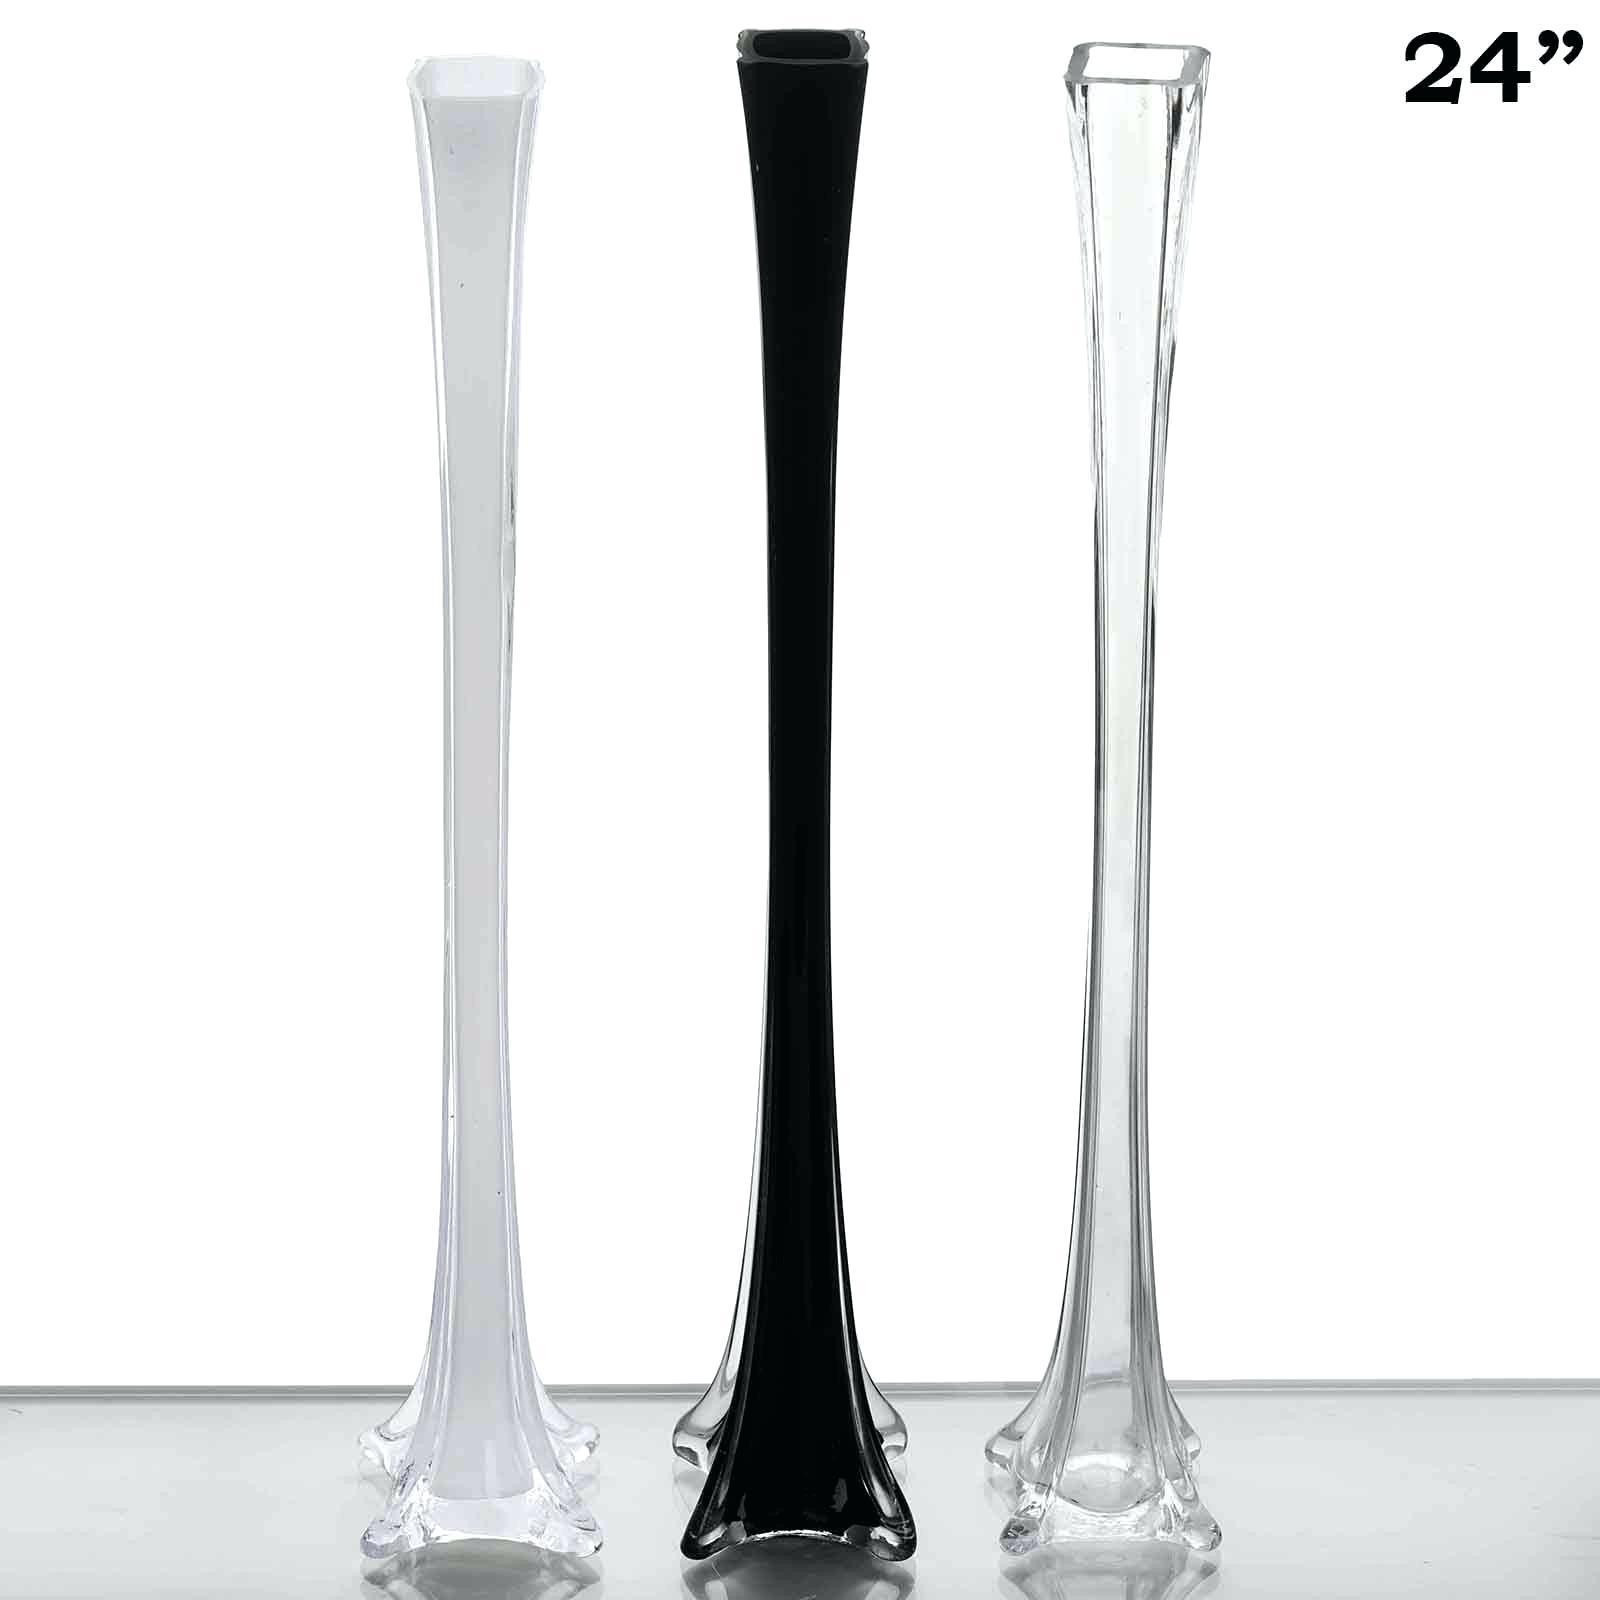 15 Cute Flared Glass Vase 2024 free download flared glass vase of glass vases with lids collection 24 inch vases bulk 23 5 flared inside glass vases with lids images fantastic chair decor ideas from living room vases wholesale awesome 